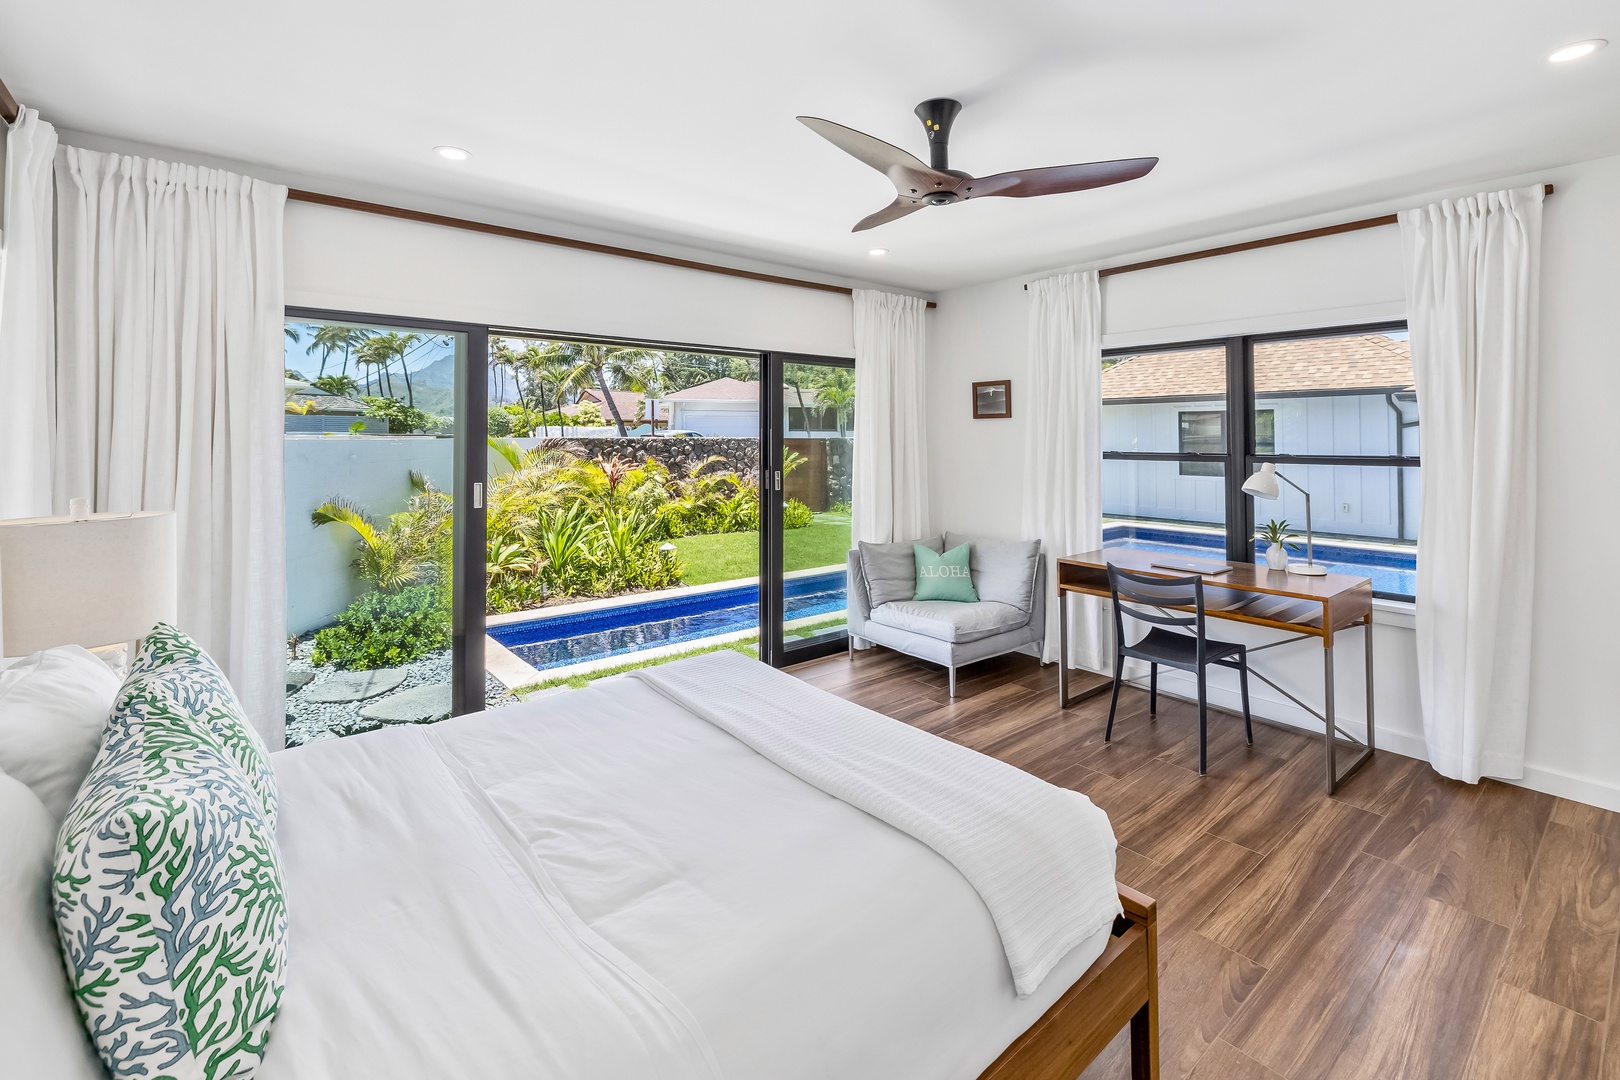 Kailua Vacation Rentals, Kailua Beach Villa - Mauka South suite also has a desk/workspace and opens directly to the private pool